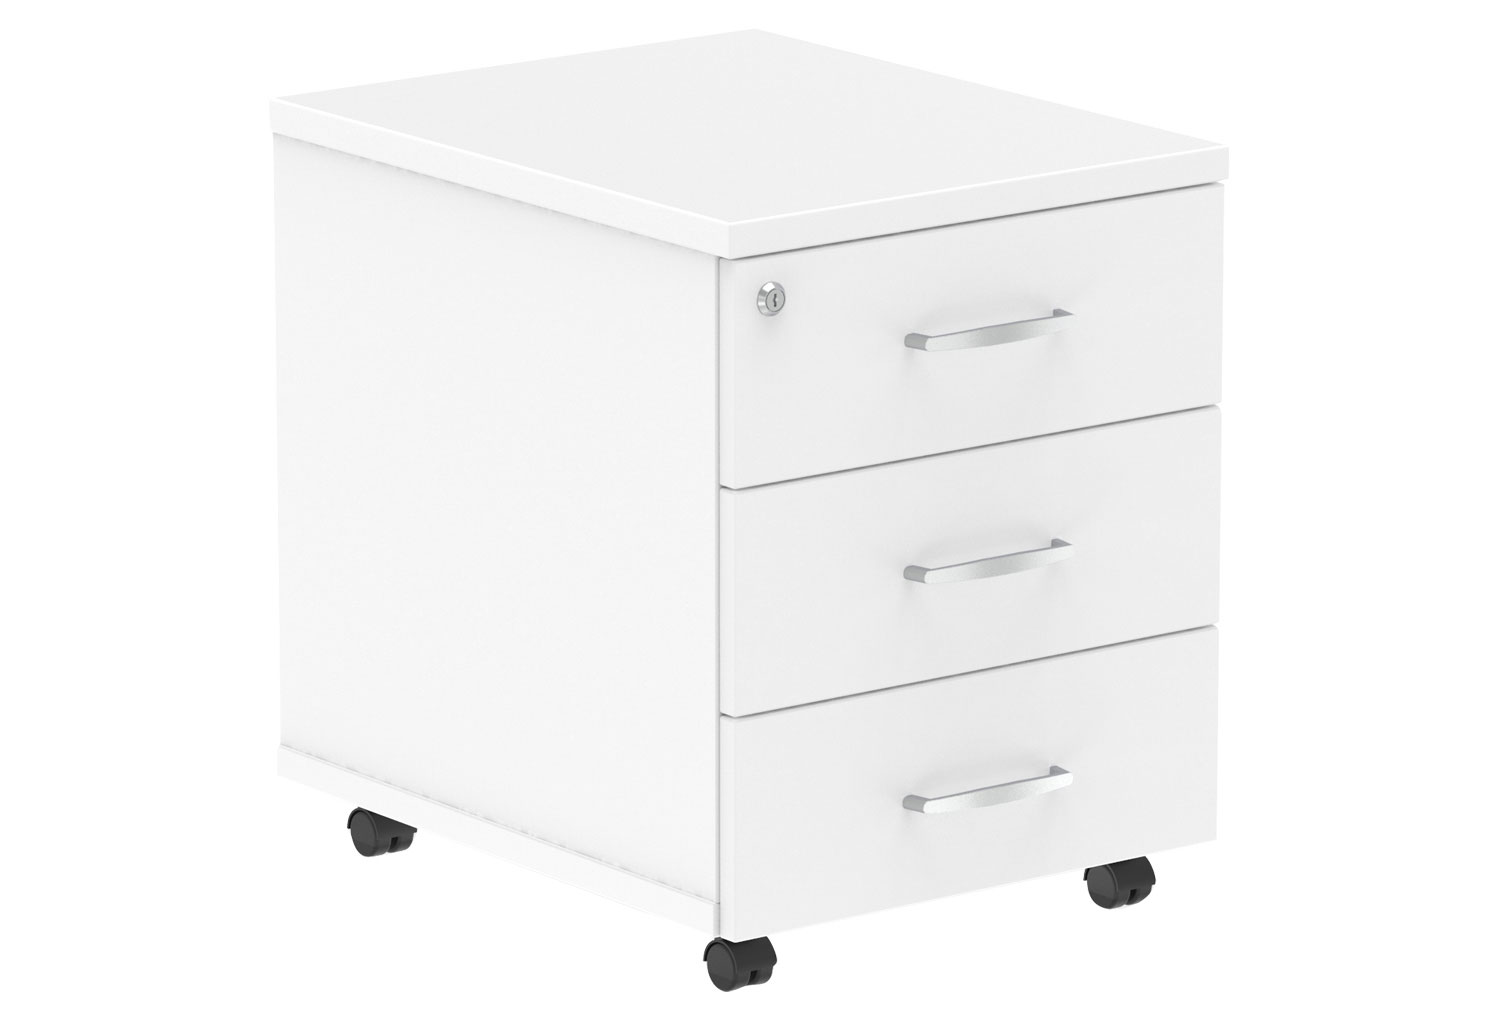 Pamola 3 Drawer Mobile Pedestal, White, Express Delivery